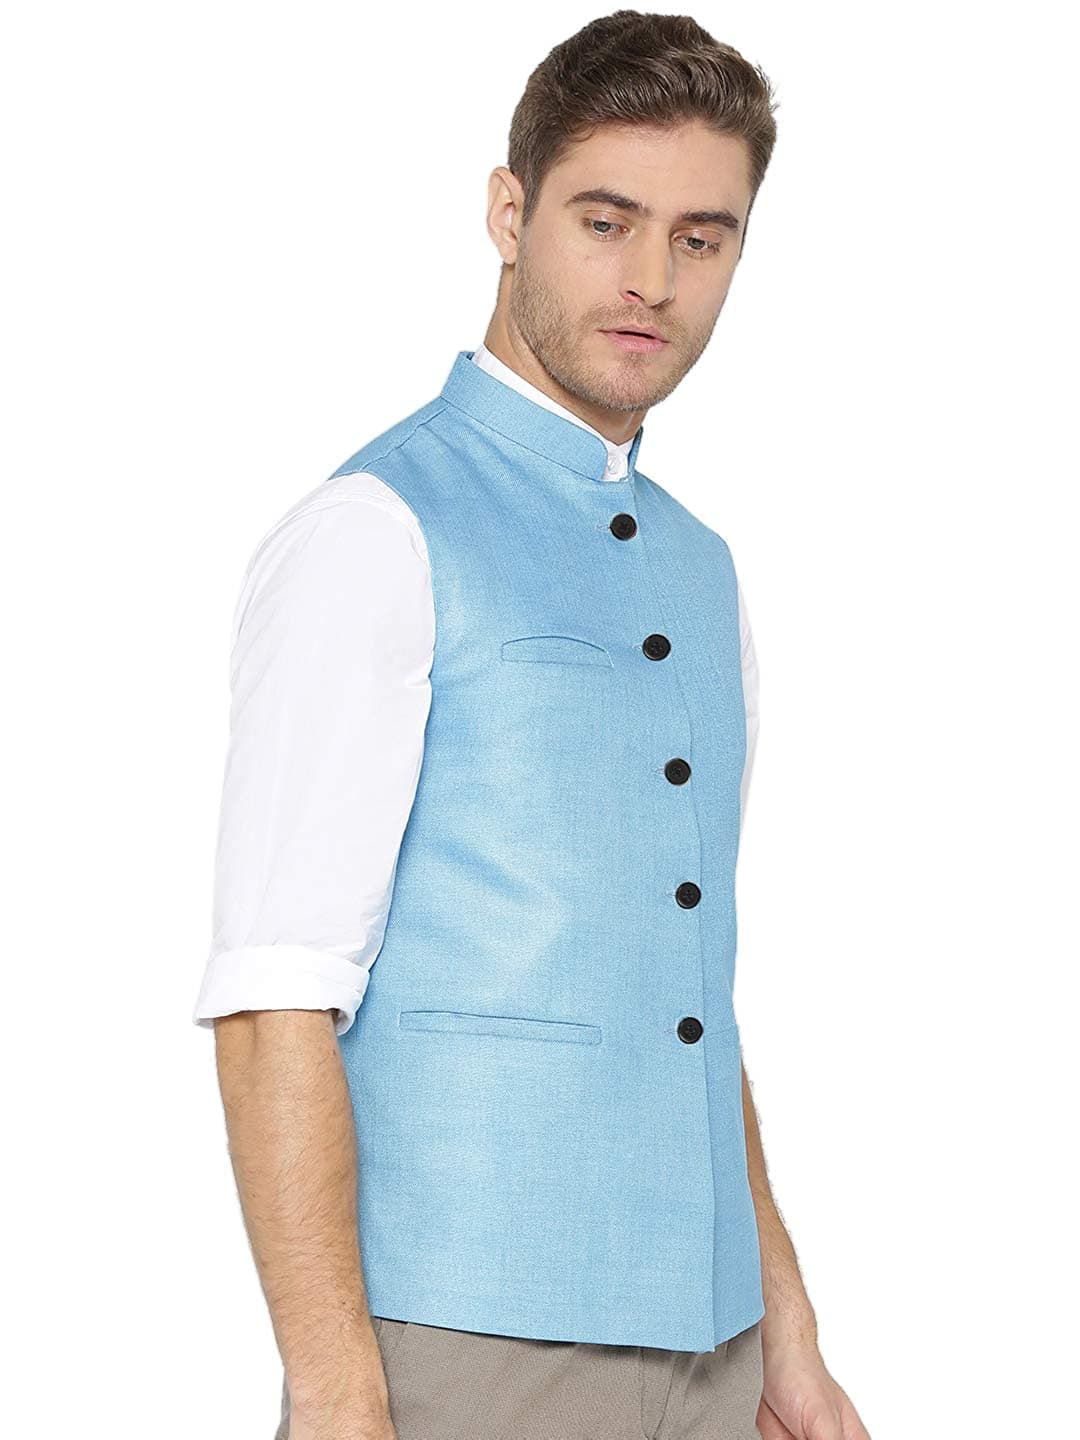 Sky Blue Cotton-Blended Indian Traditional Nehru Jacket Ethnic Waistcoat